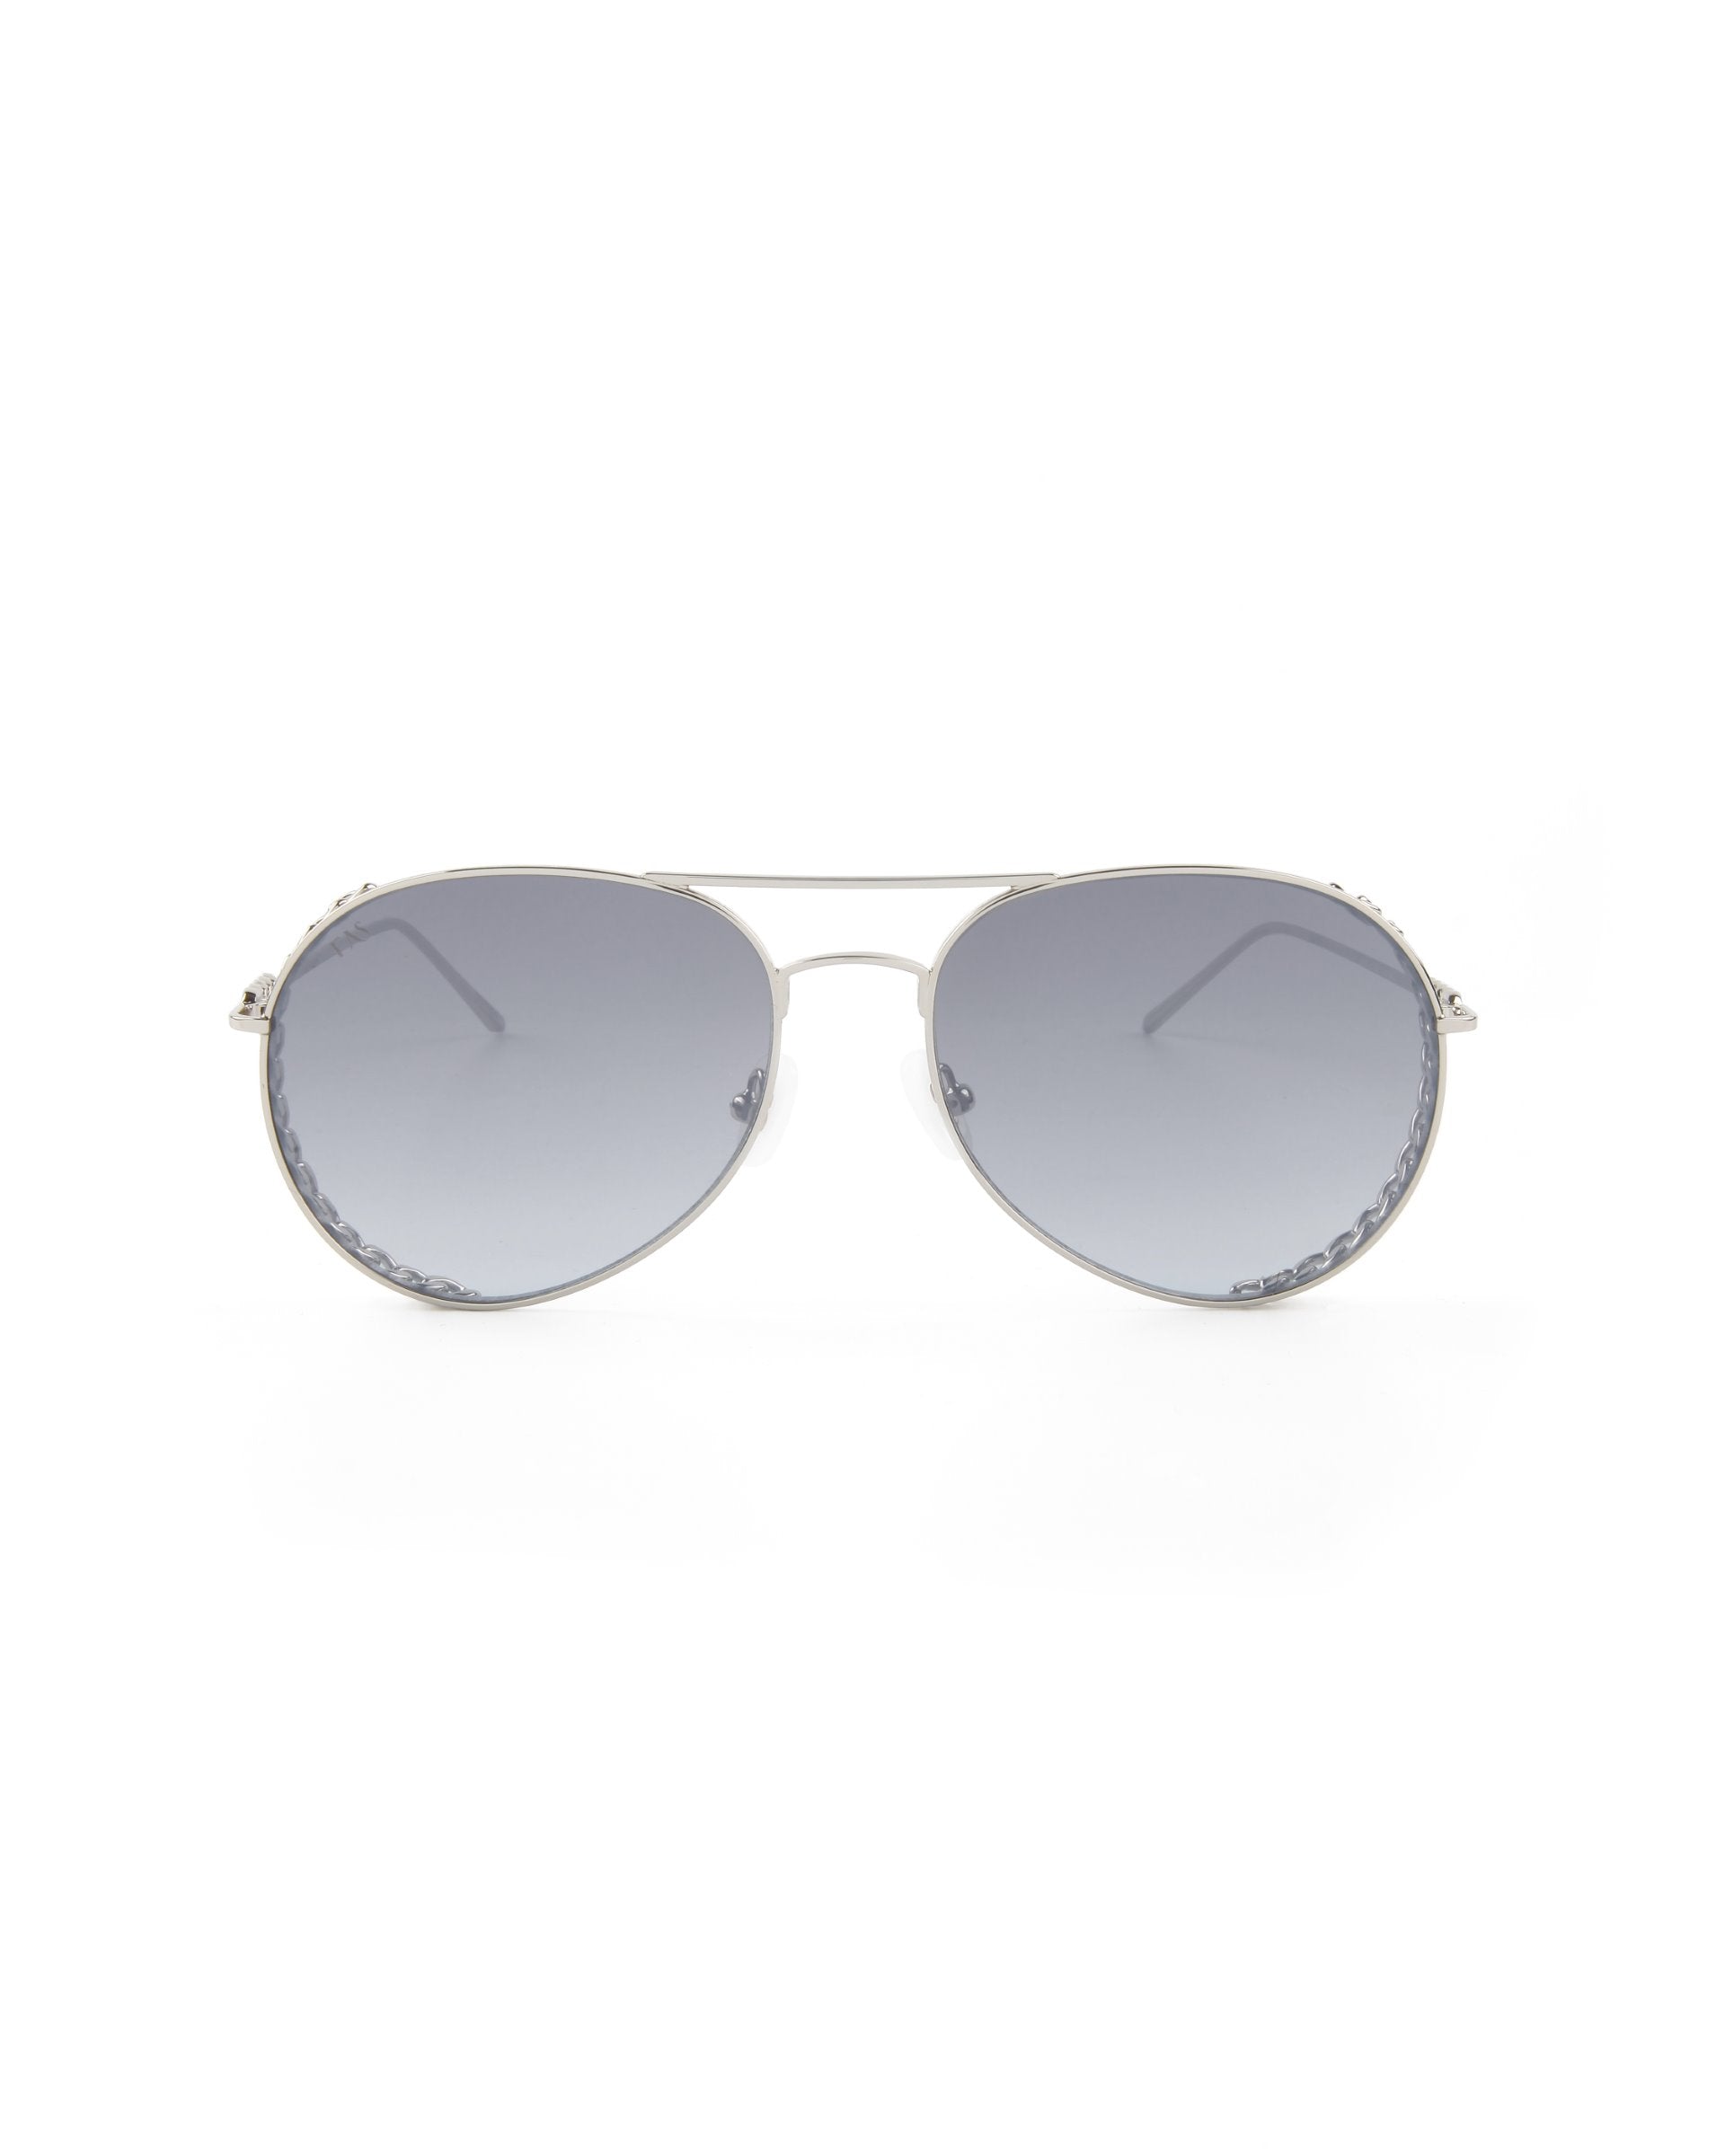 A pair of gold plated stainless steel aviator sunglasses with dark gradient nylon lenses. The Links by For Art&#39;s Sake® have thin metal frames and nose pads, giving them a classic, sleek appearance.